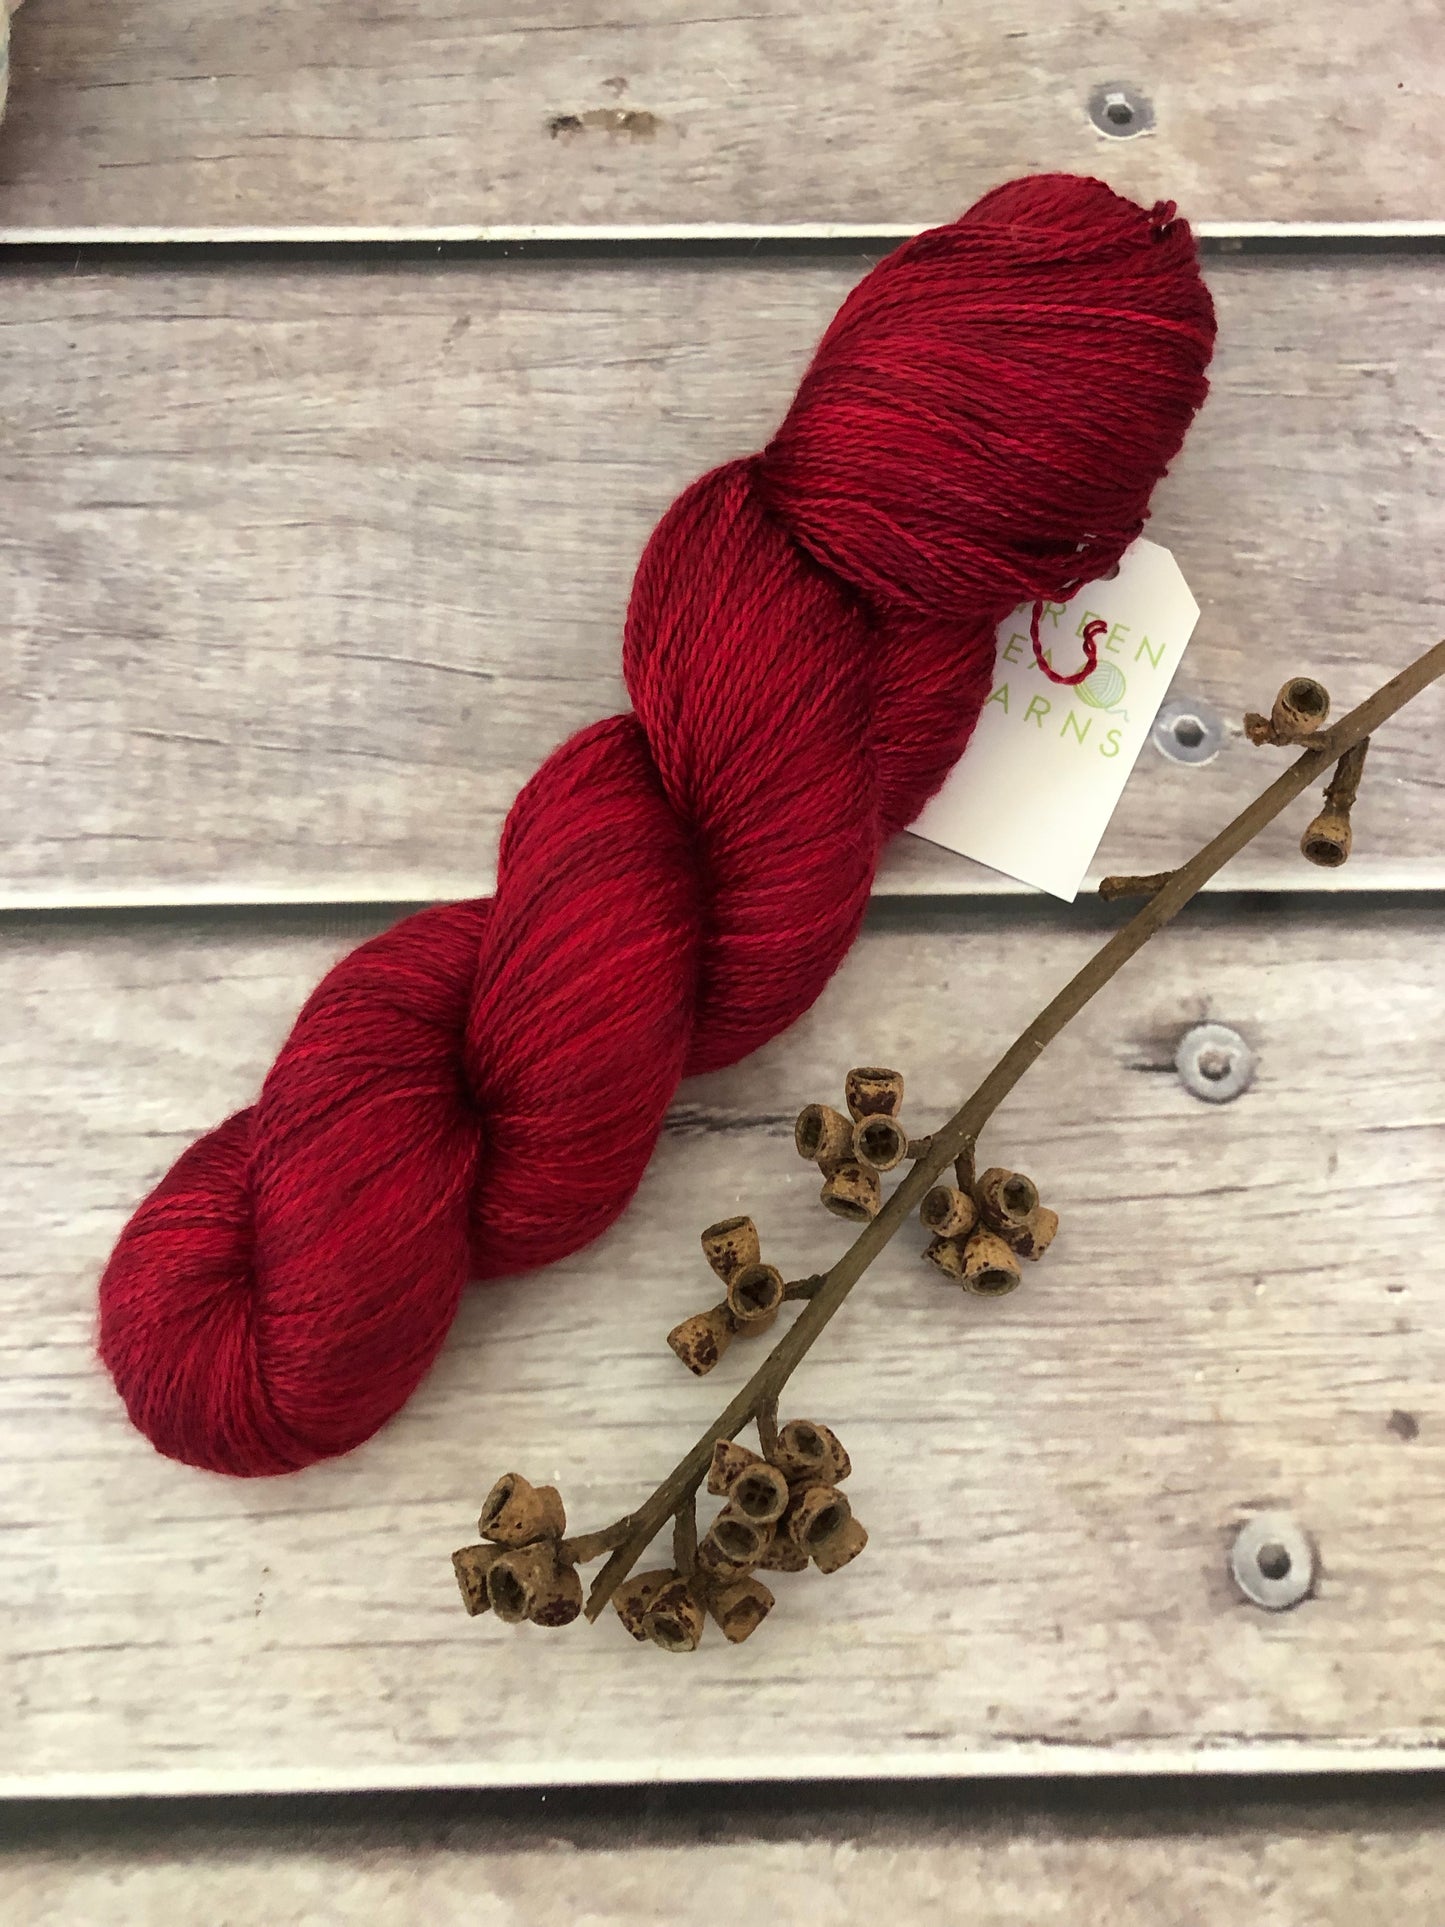 Dark Red Lacquer - 3 ply in Mulberry silk - Pekoe hl